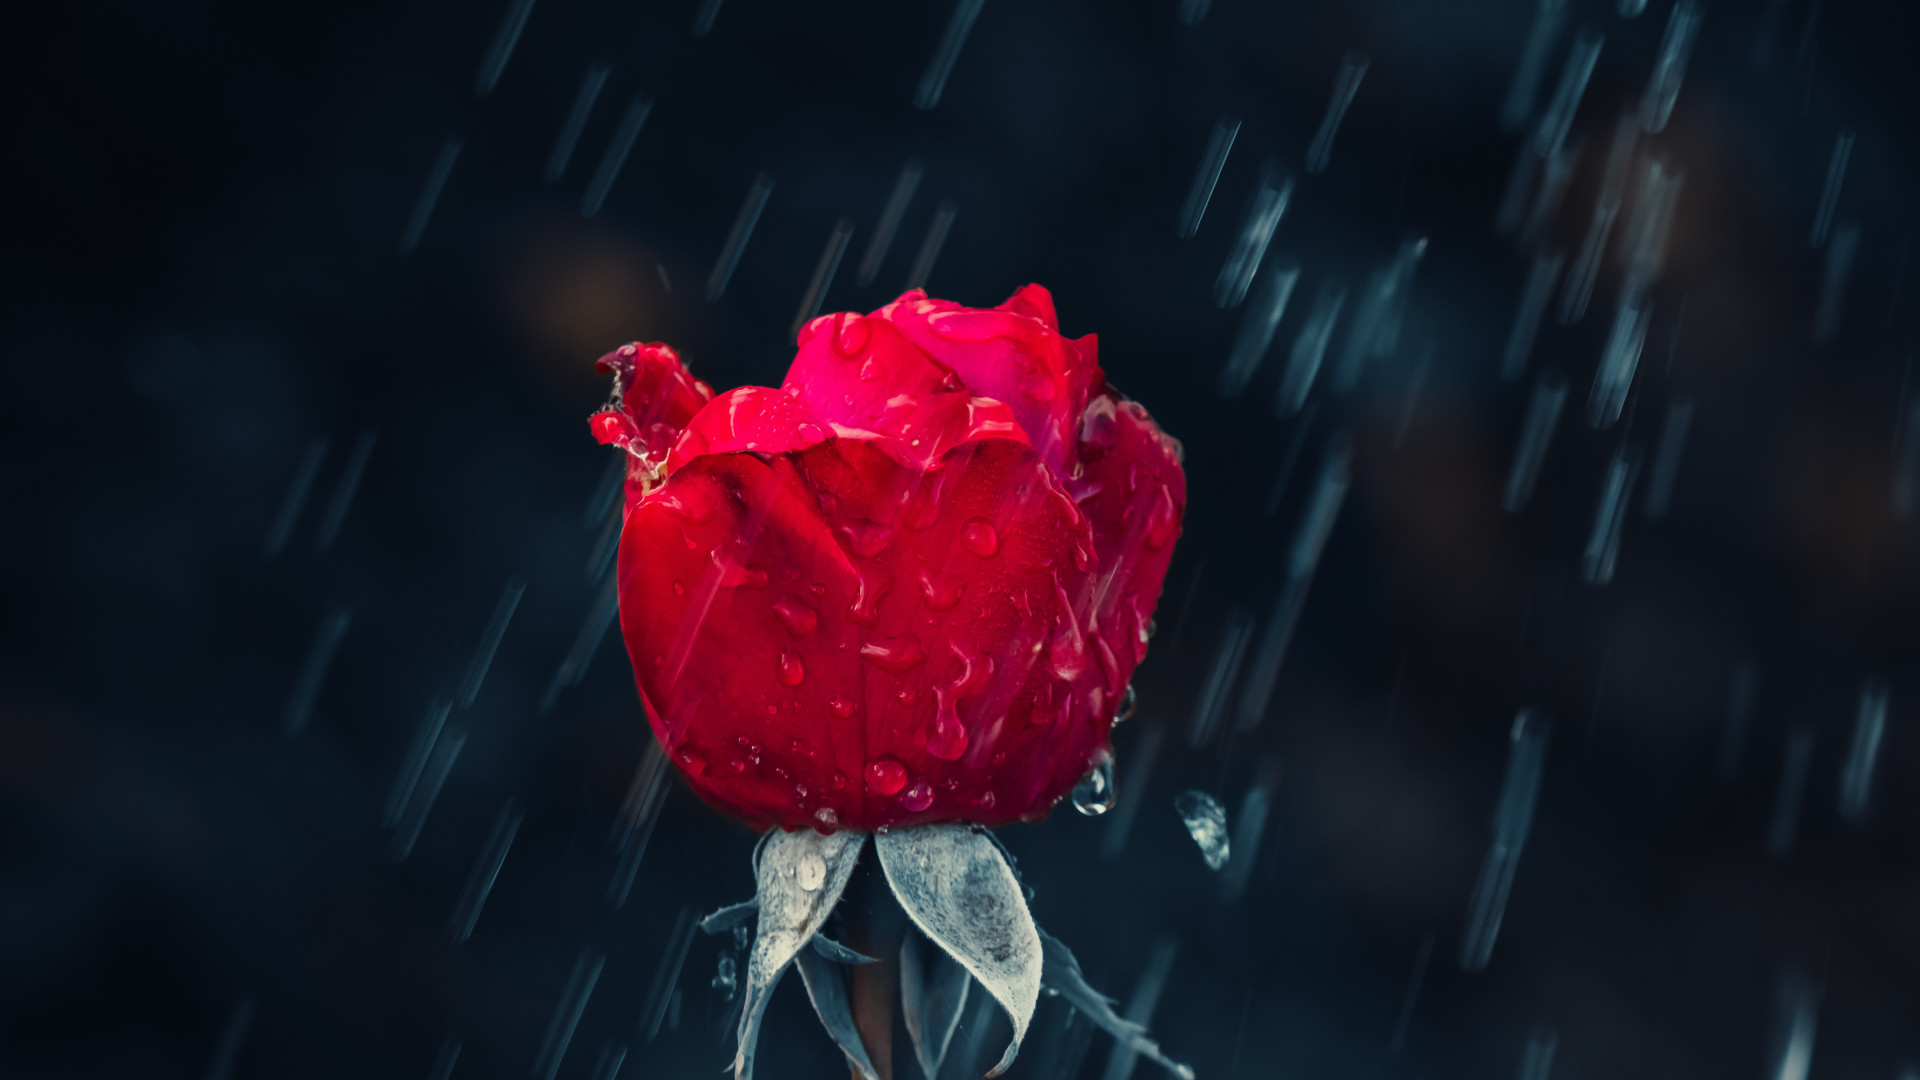 Red rose and raindrops wallpaper 1920x1080